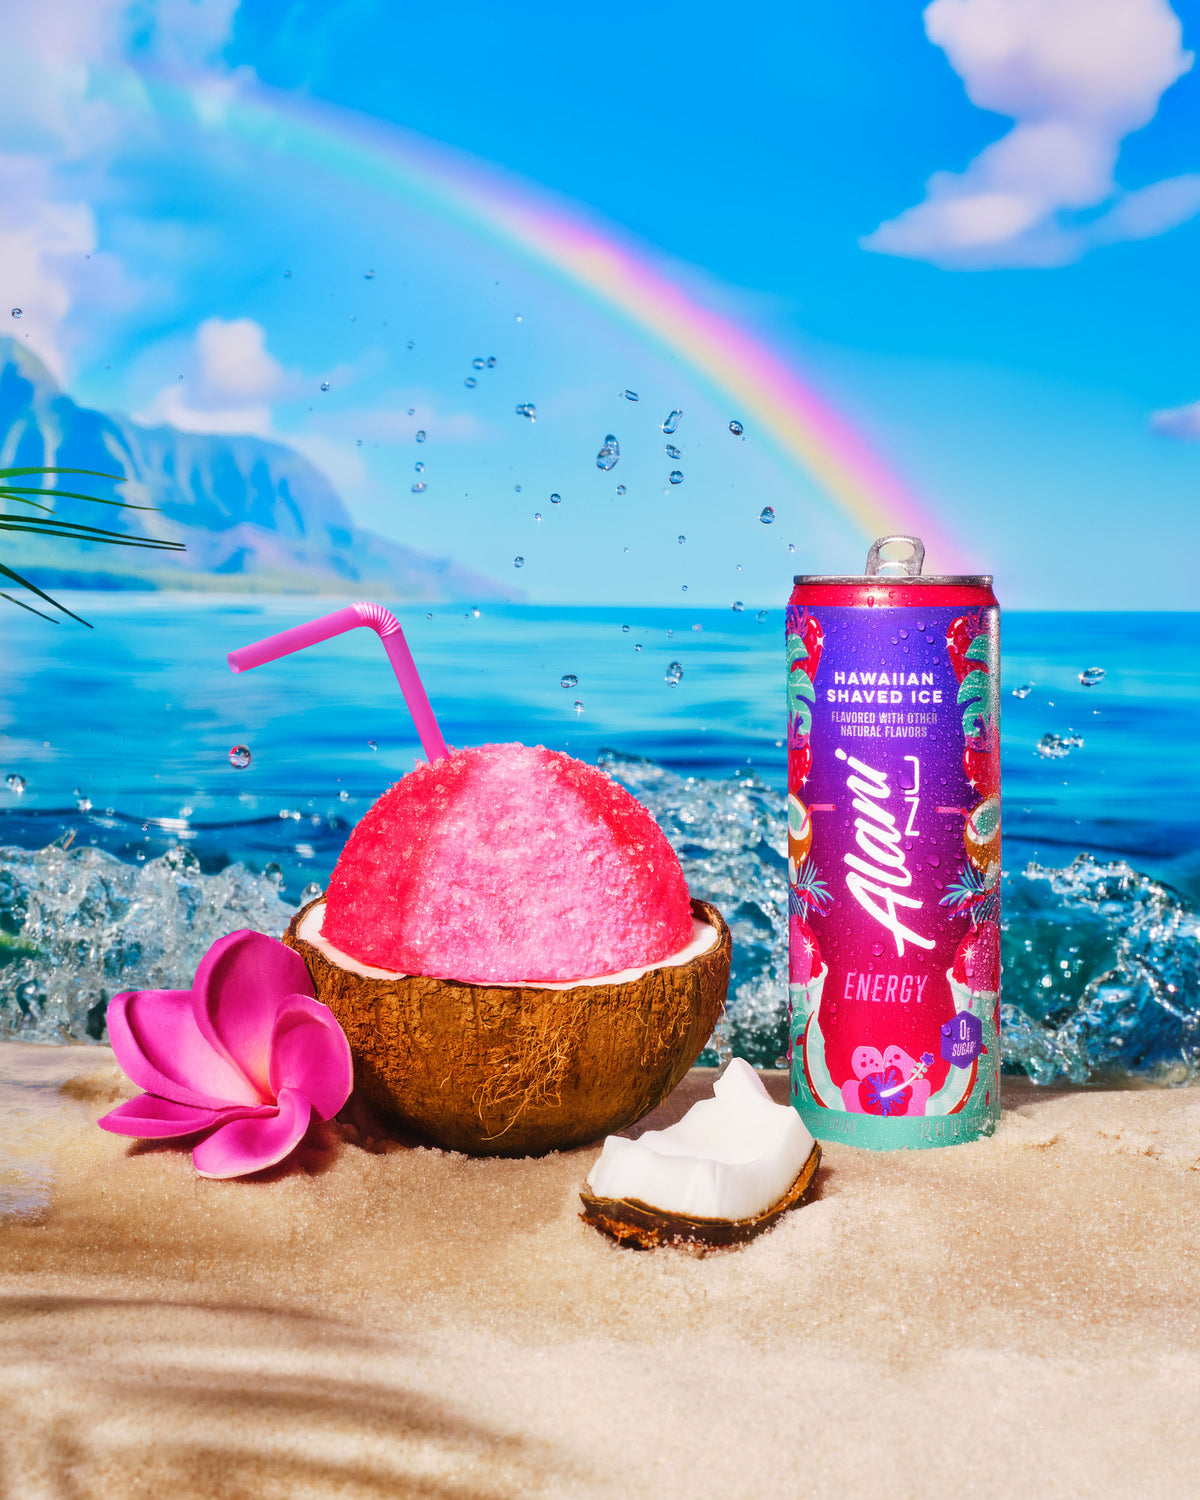 An Energy Drink next to pink shaved ice in a coconut shell. In the distance, a lush island and a rainbow. ​ 